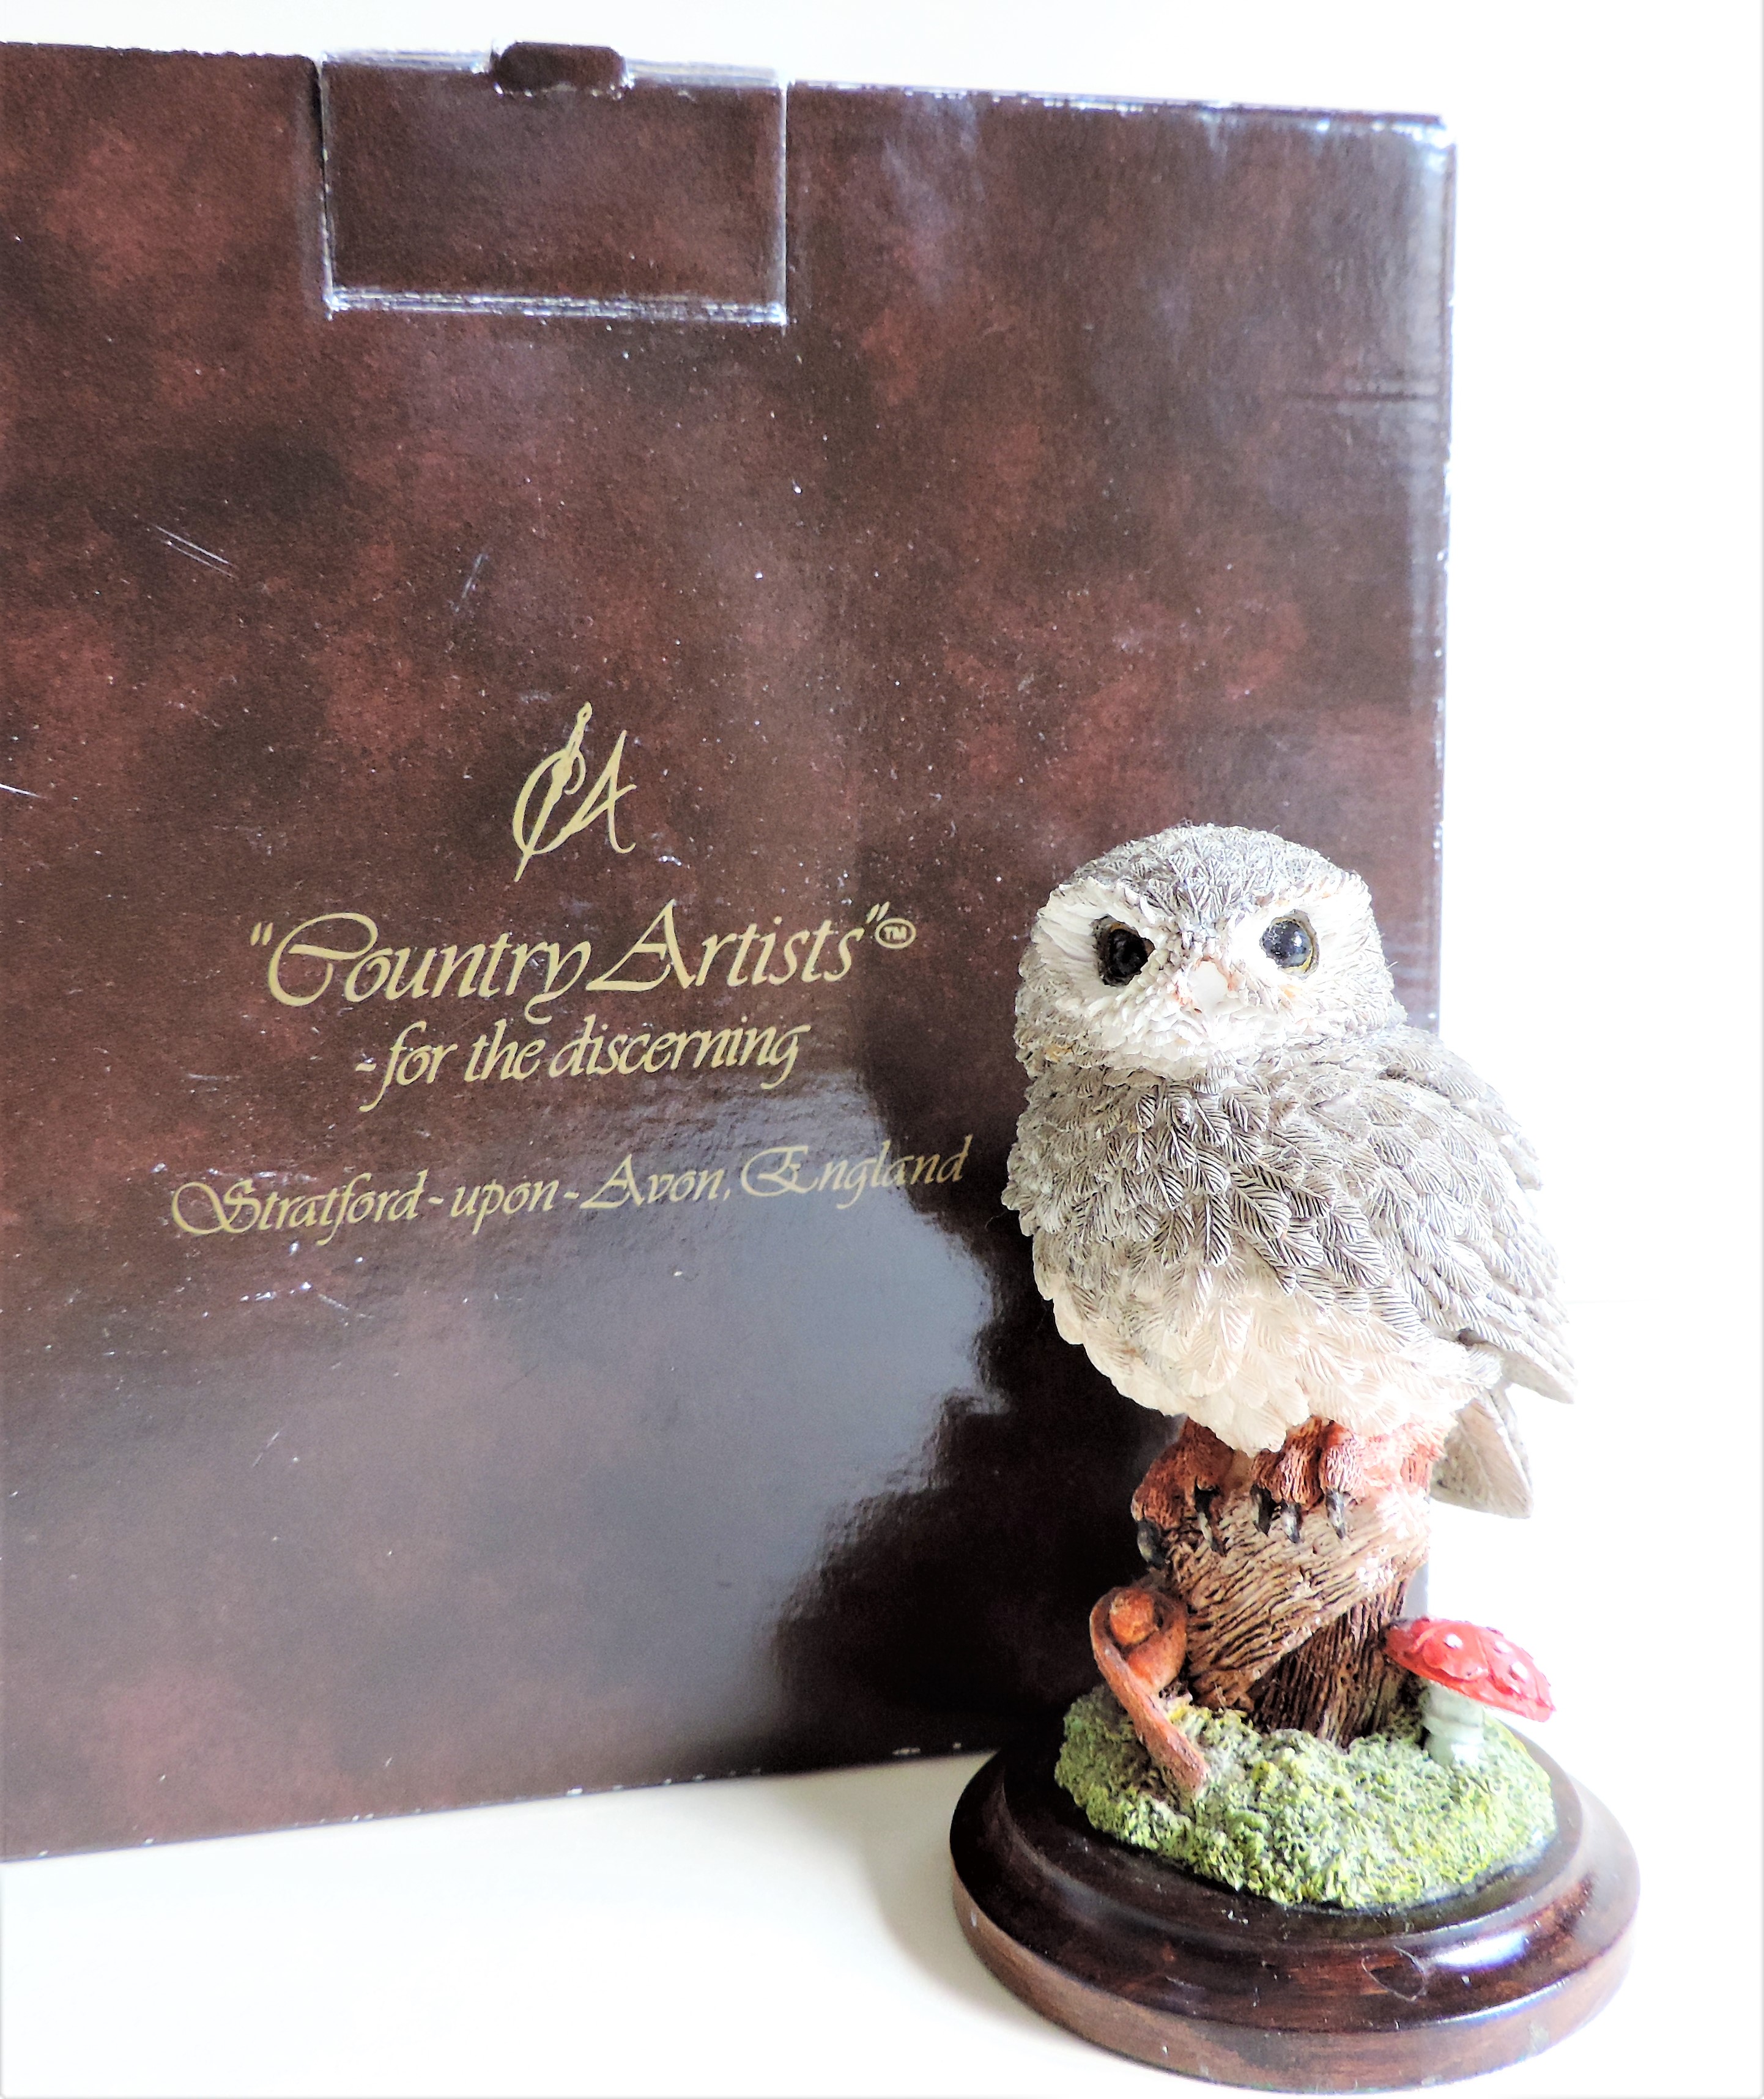 Vintage Country Artists Langford Little Owl Figurine